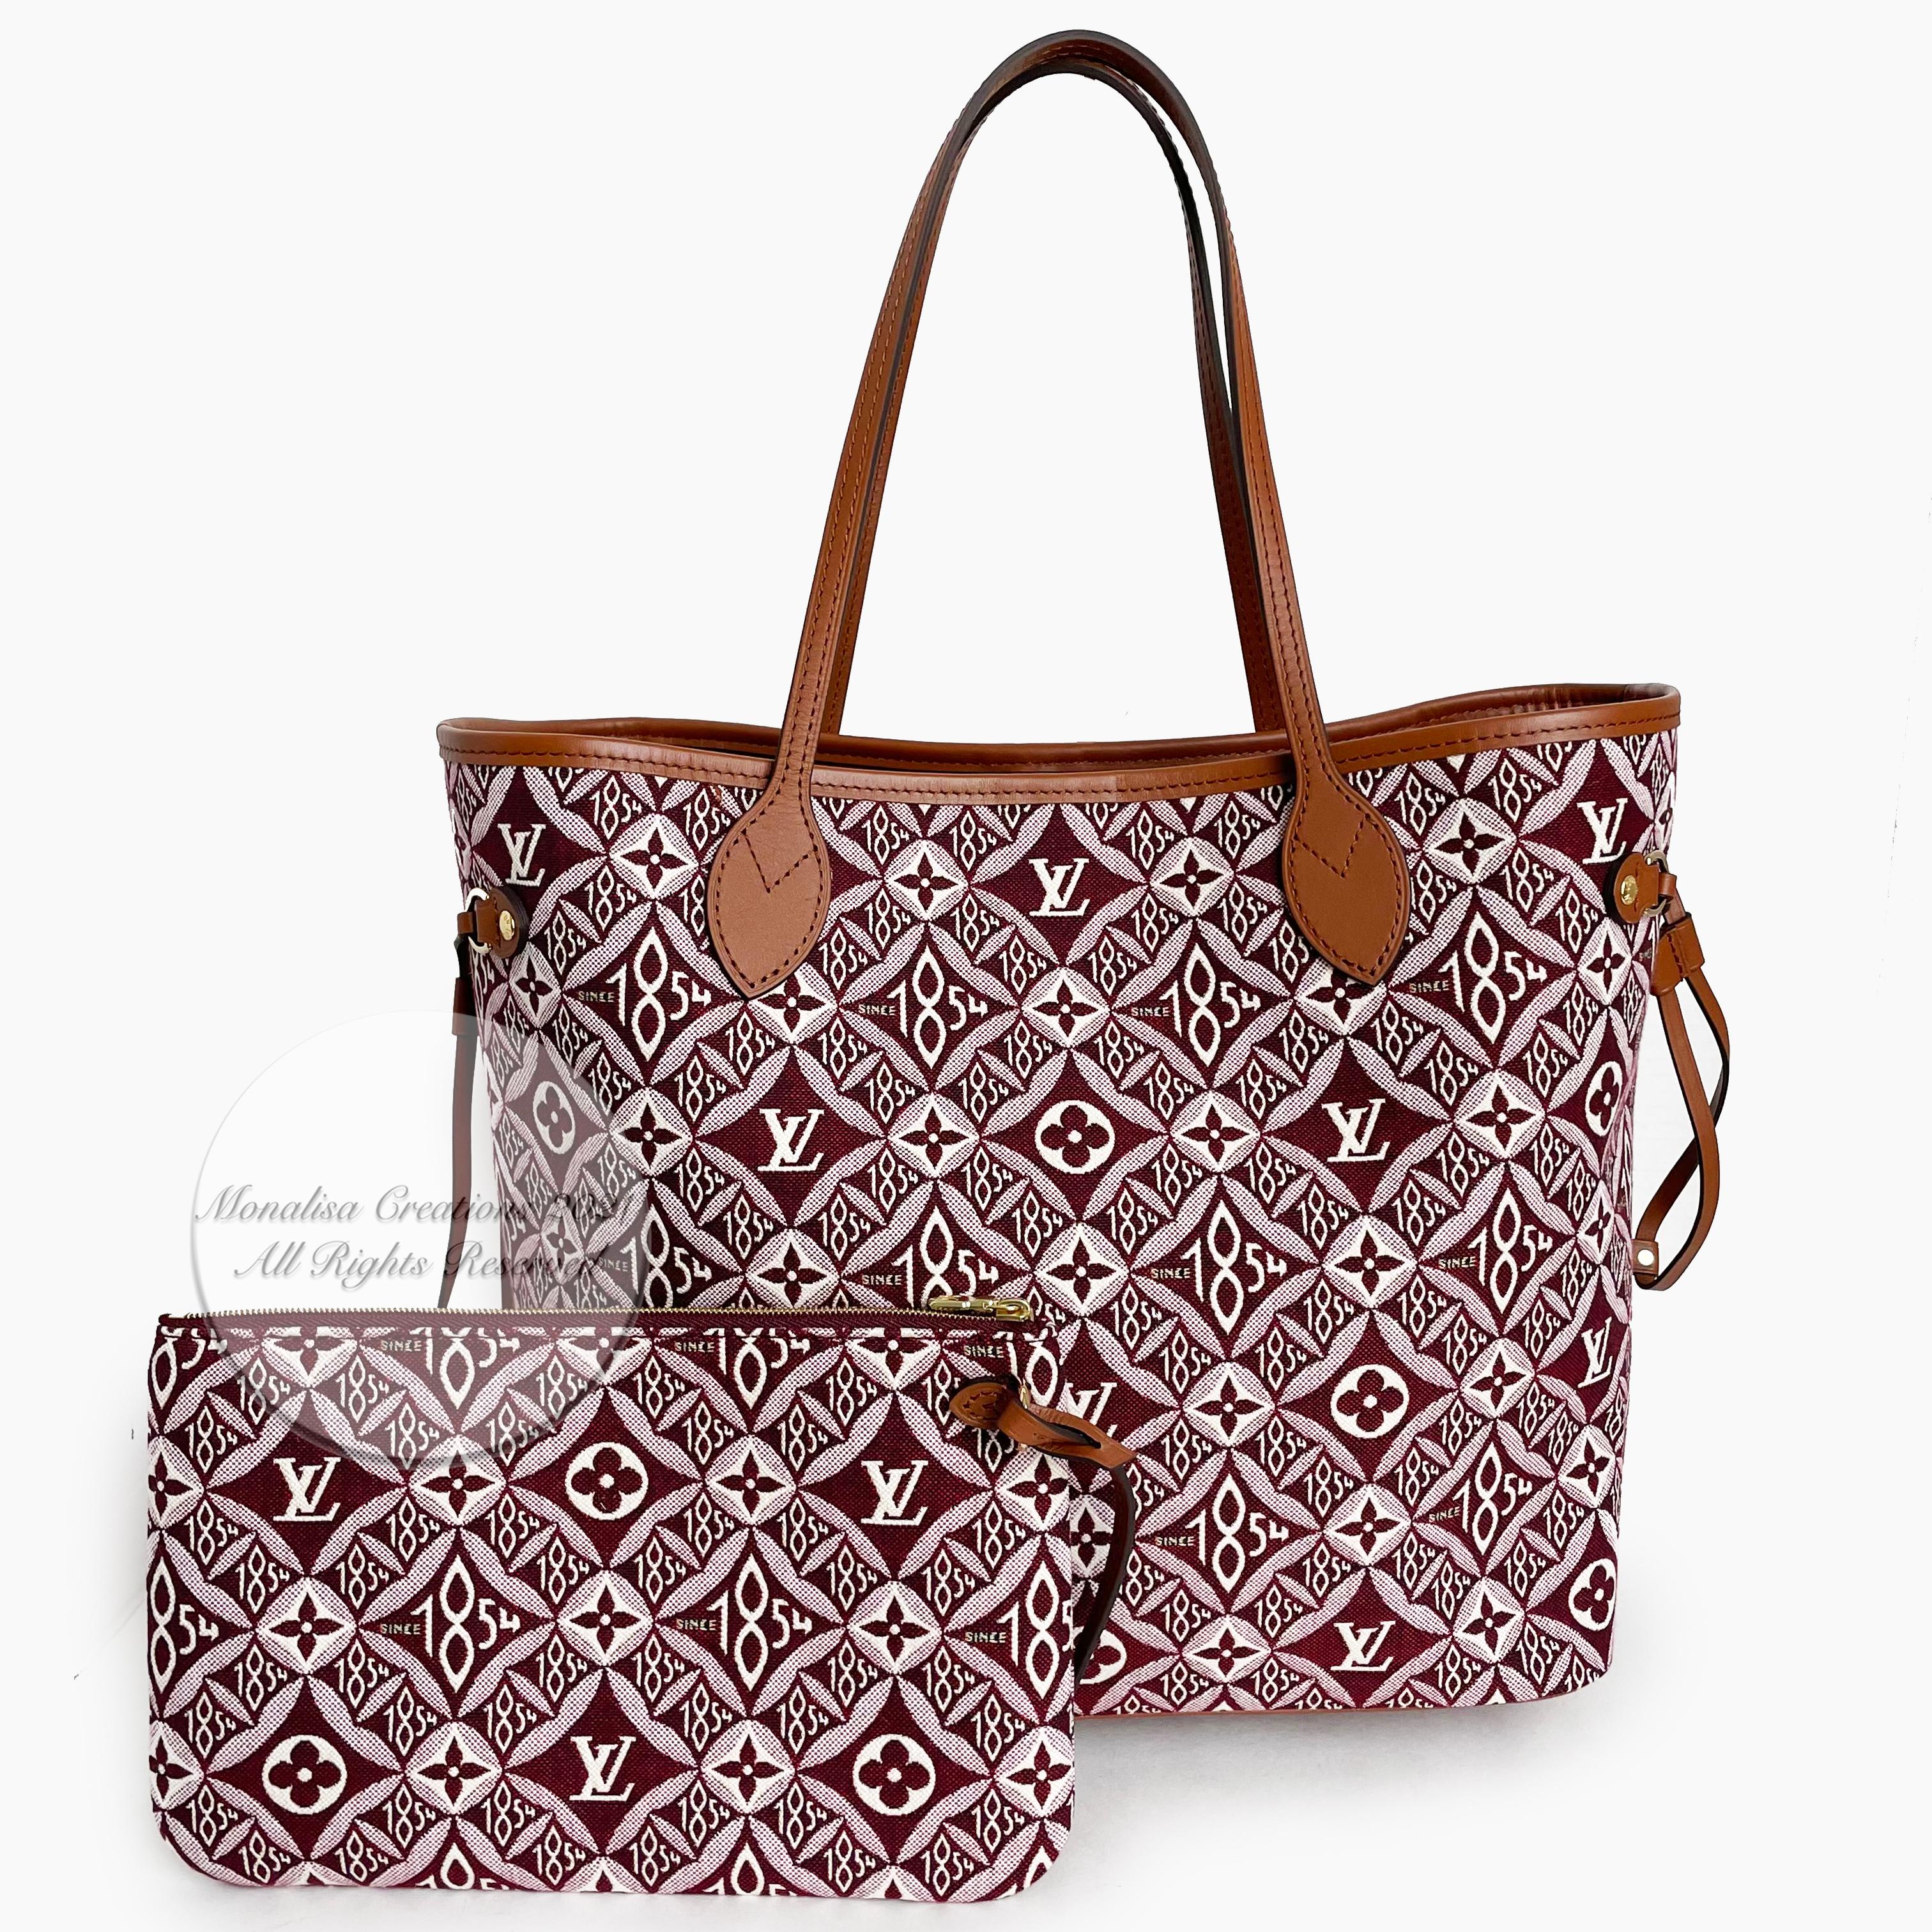 Authentic Louis Vuitton Since 1854 Neverfull MM in Bordeaux. From the Fall 2020 collection, this color way now sold out online. Nicolas Ghesquière’s canvas pays tribute to LV's historic symbols. Bordeaux canvas/calfskin leather handles. Lined in